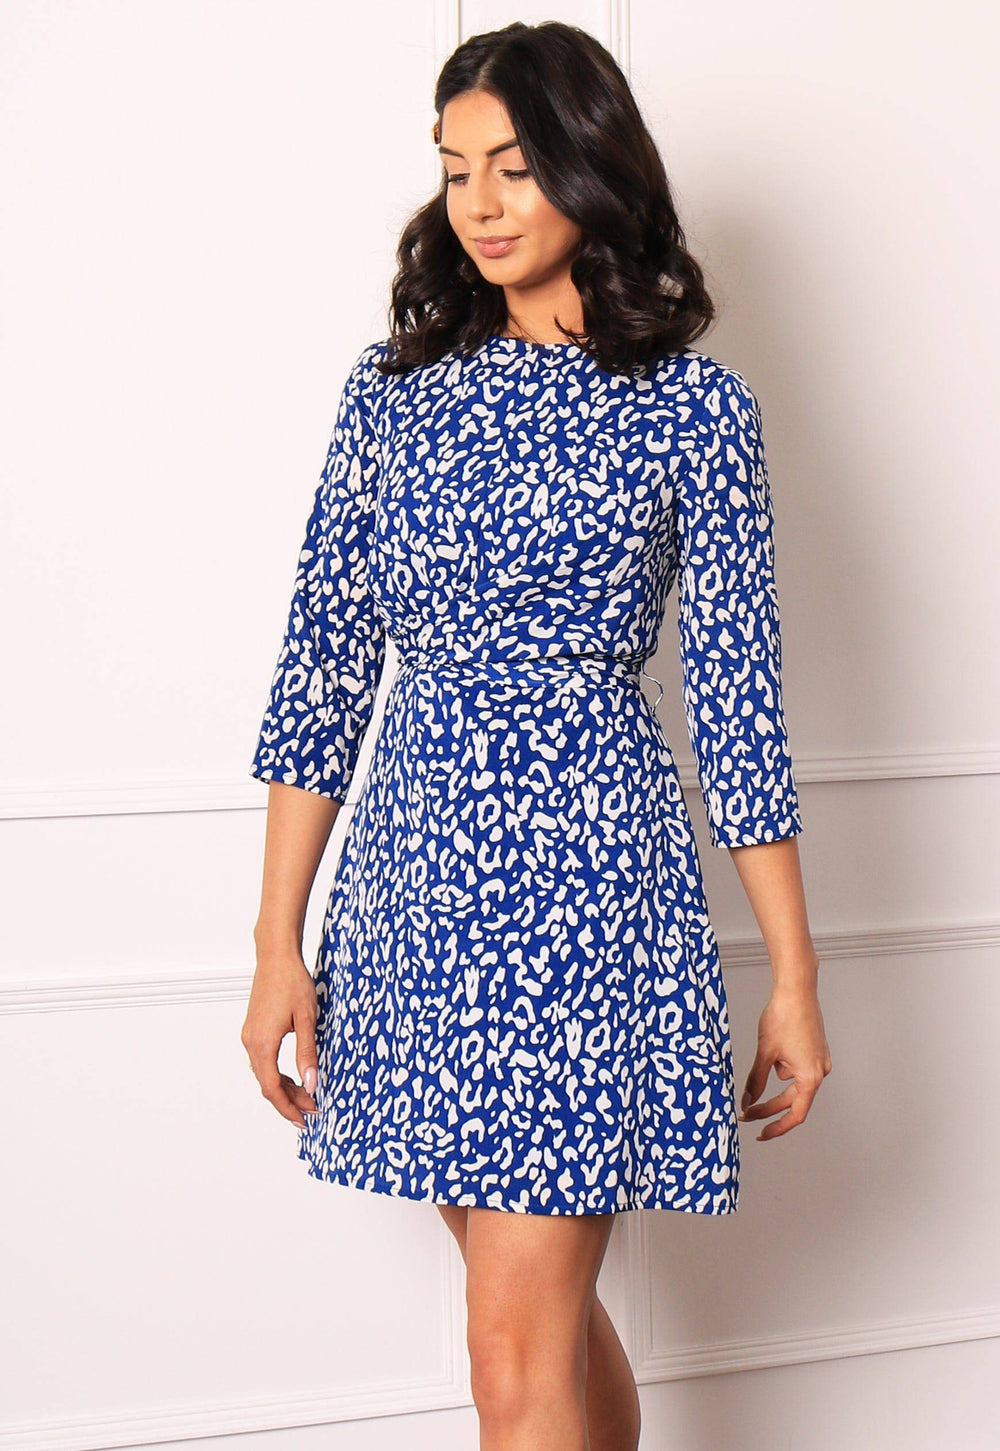 Leopard Print Twist Belted Mini Dress with Skater Skirt in Blue & White - One Nation Clothing